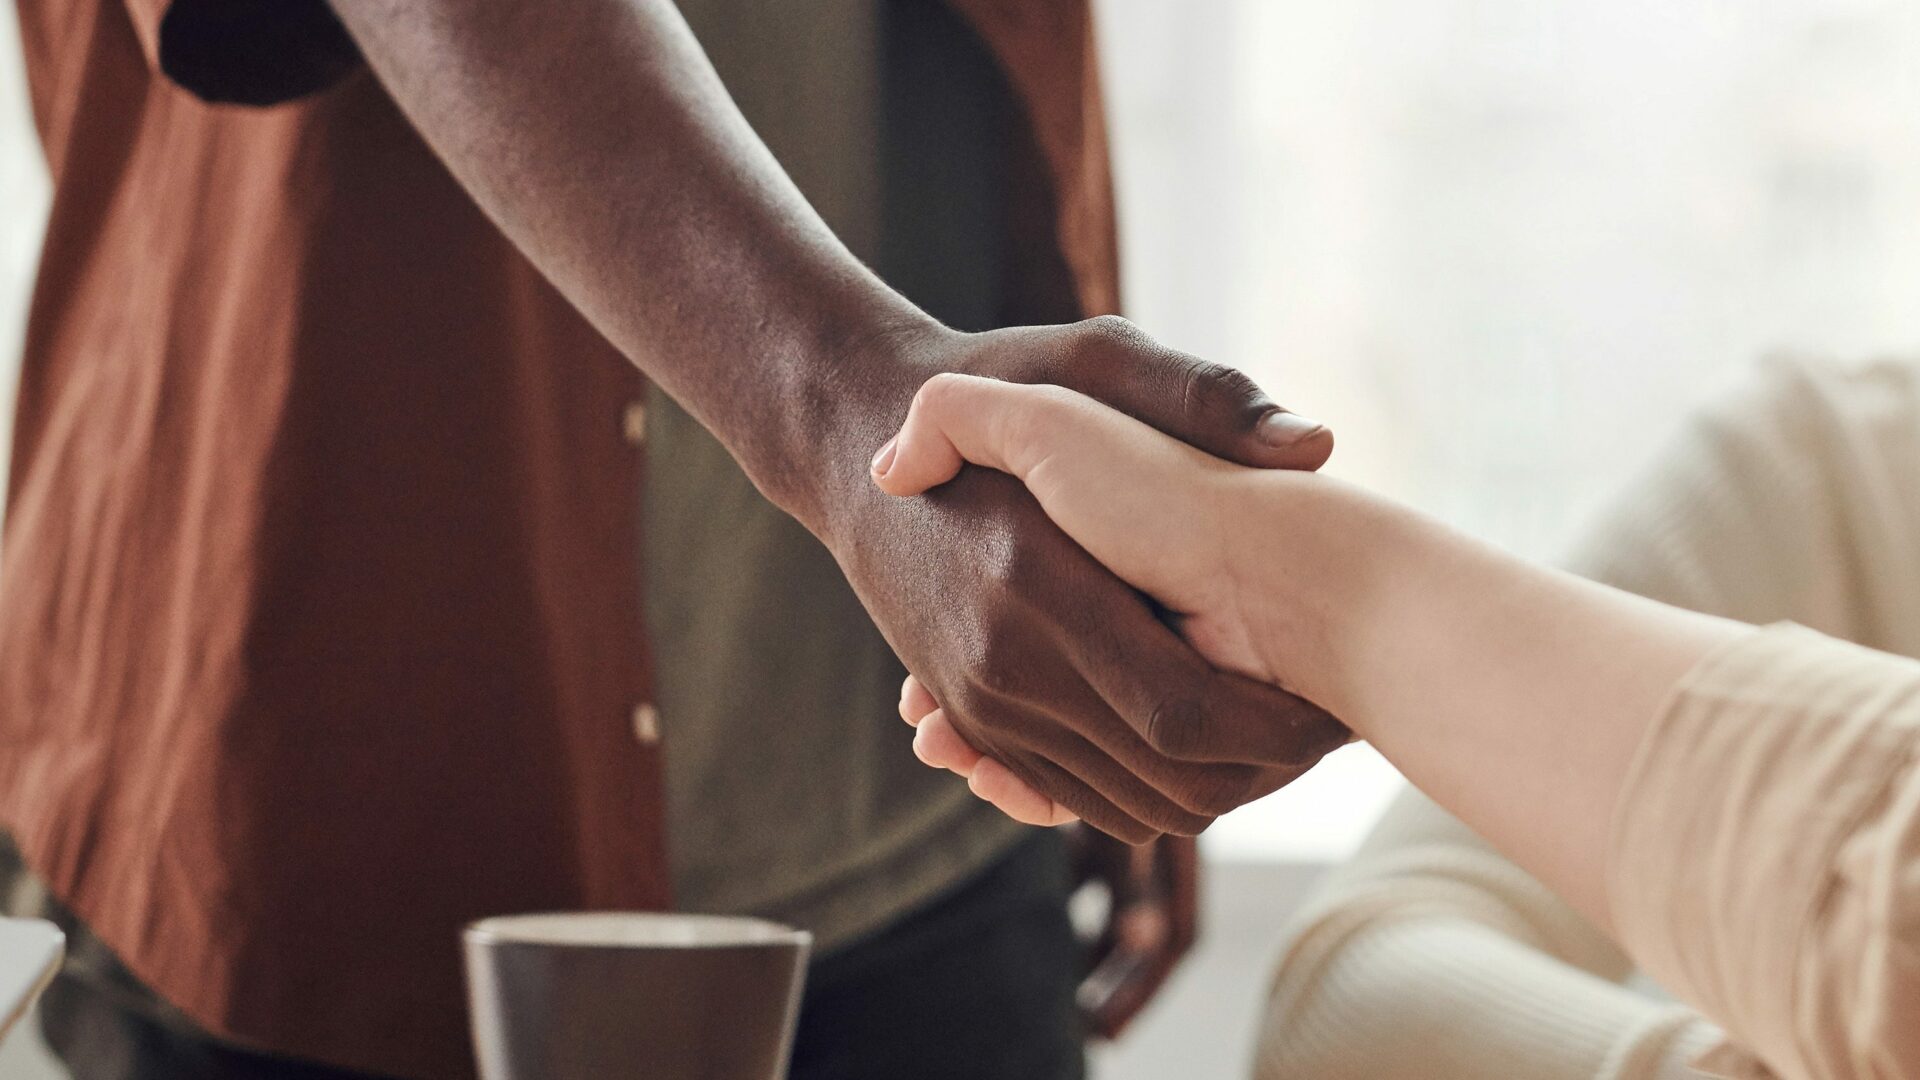 Shaking hands (Photo by Fauxels on Pexels.com)